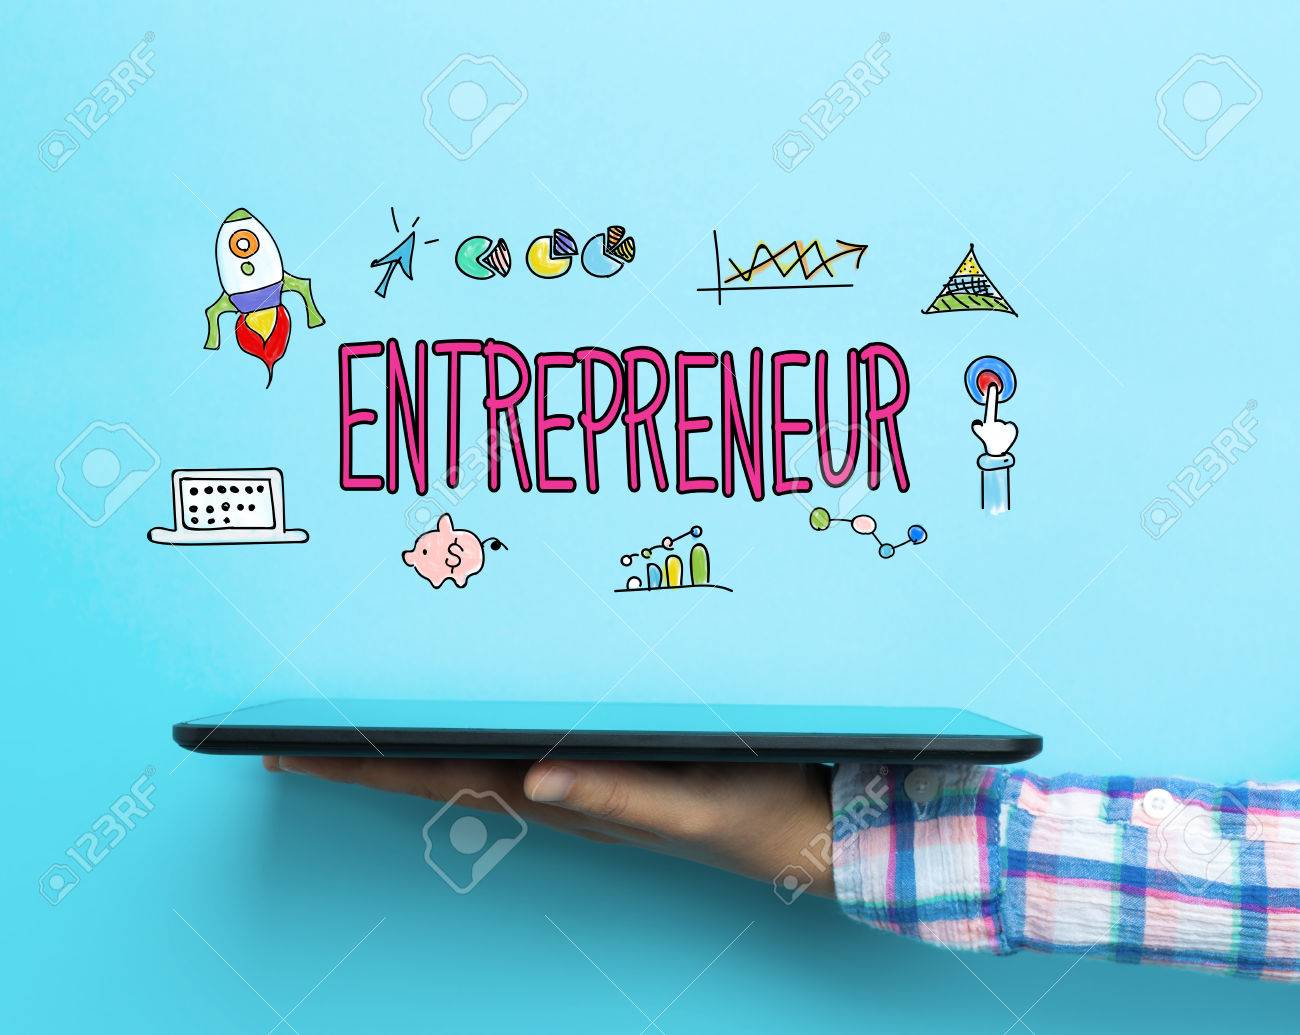 Entrepreneur Concept With A Tablet On Blue Background Stock Photo